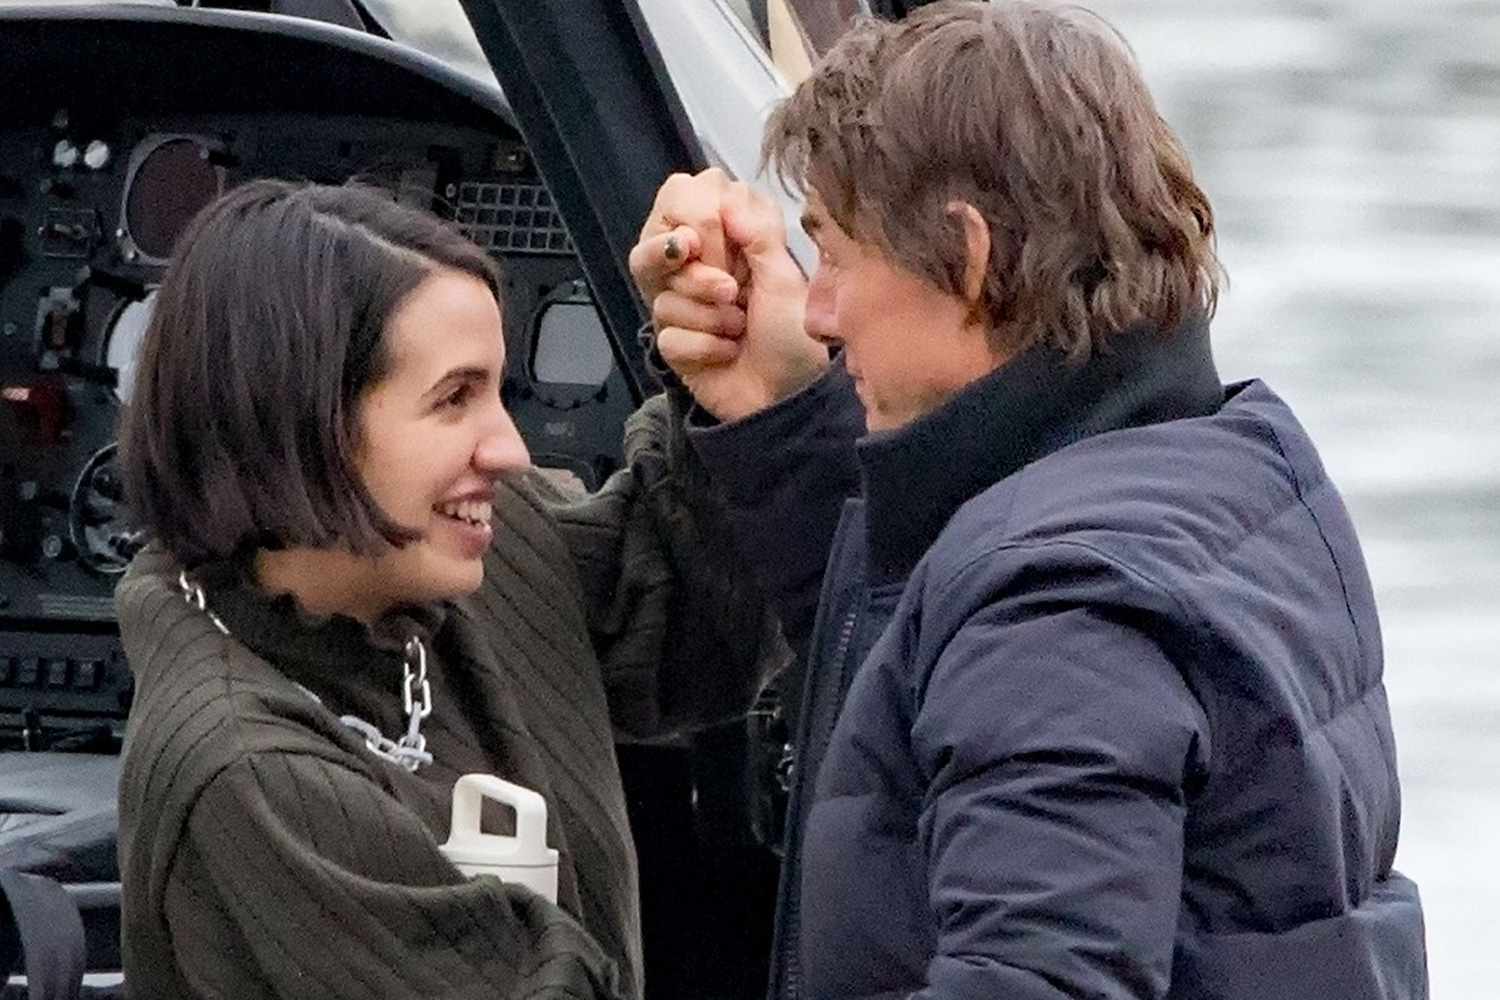 Tom Cruise Gives Singer Victoria Canal and Her Brother a Helicopter Ride After Meeting at Glastonbury Festival